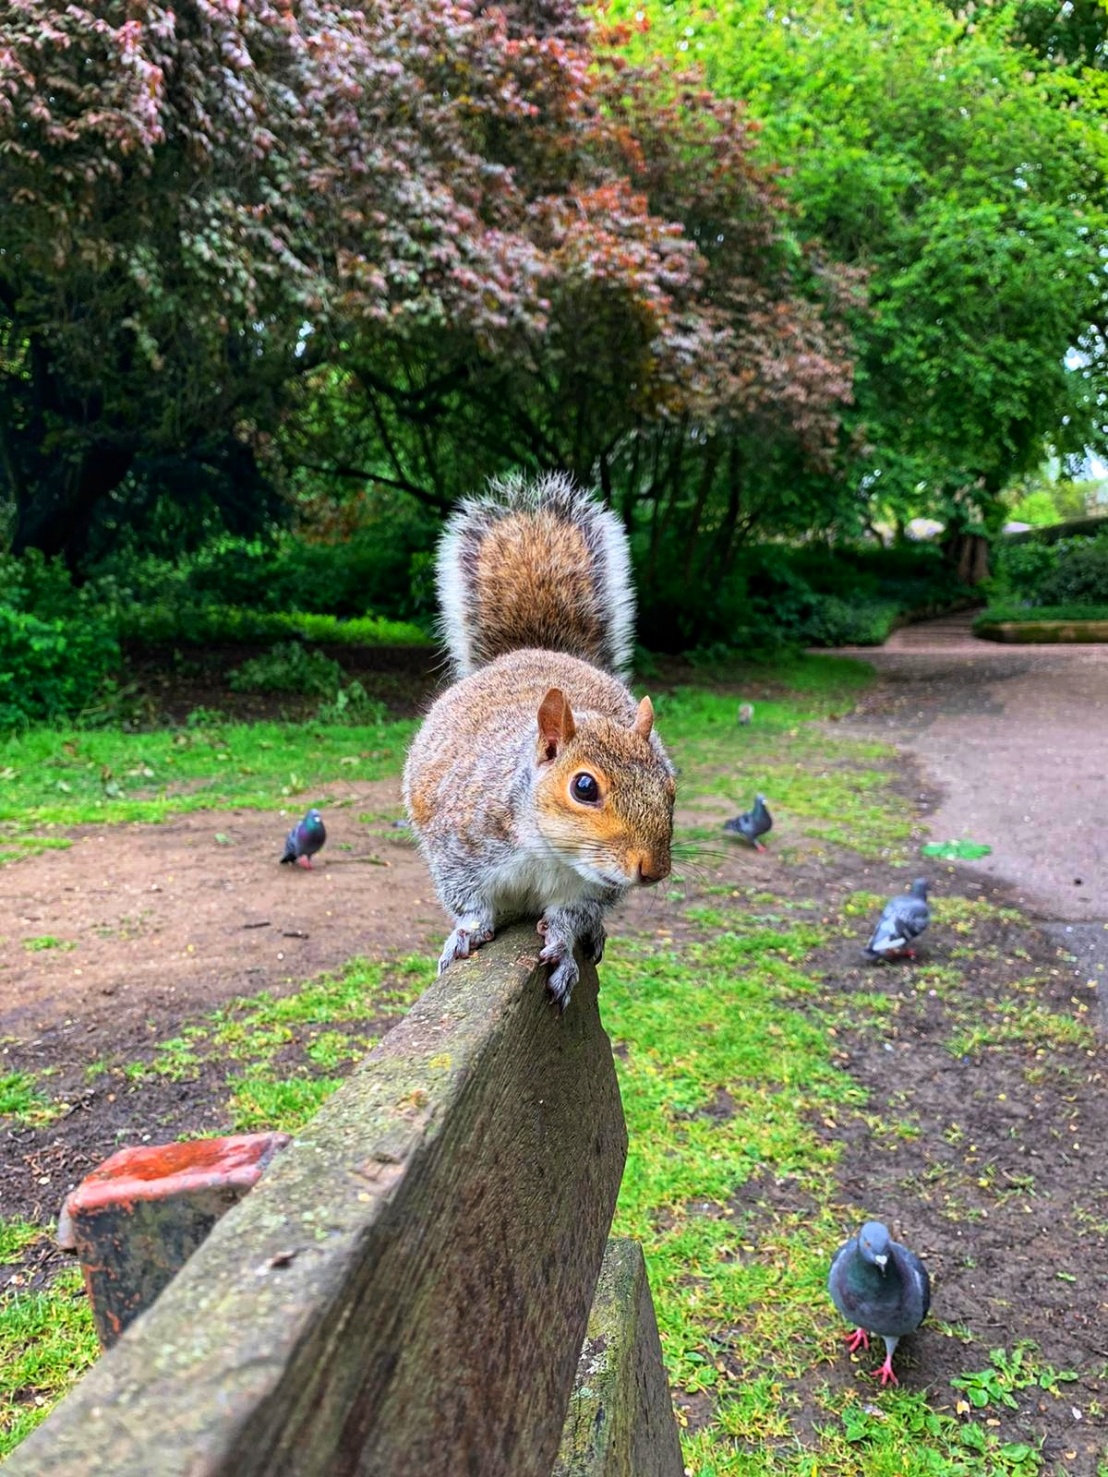 A red squirrel on top of a bench in a park